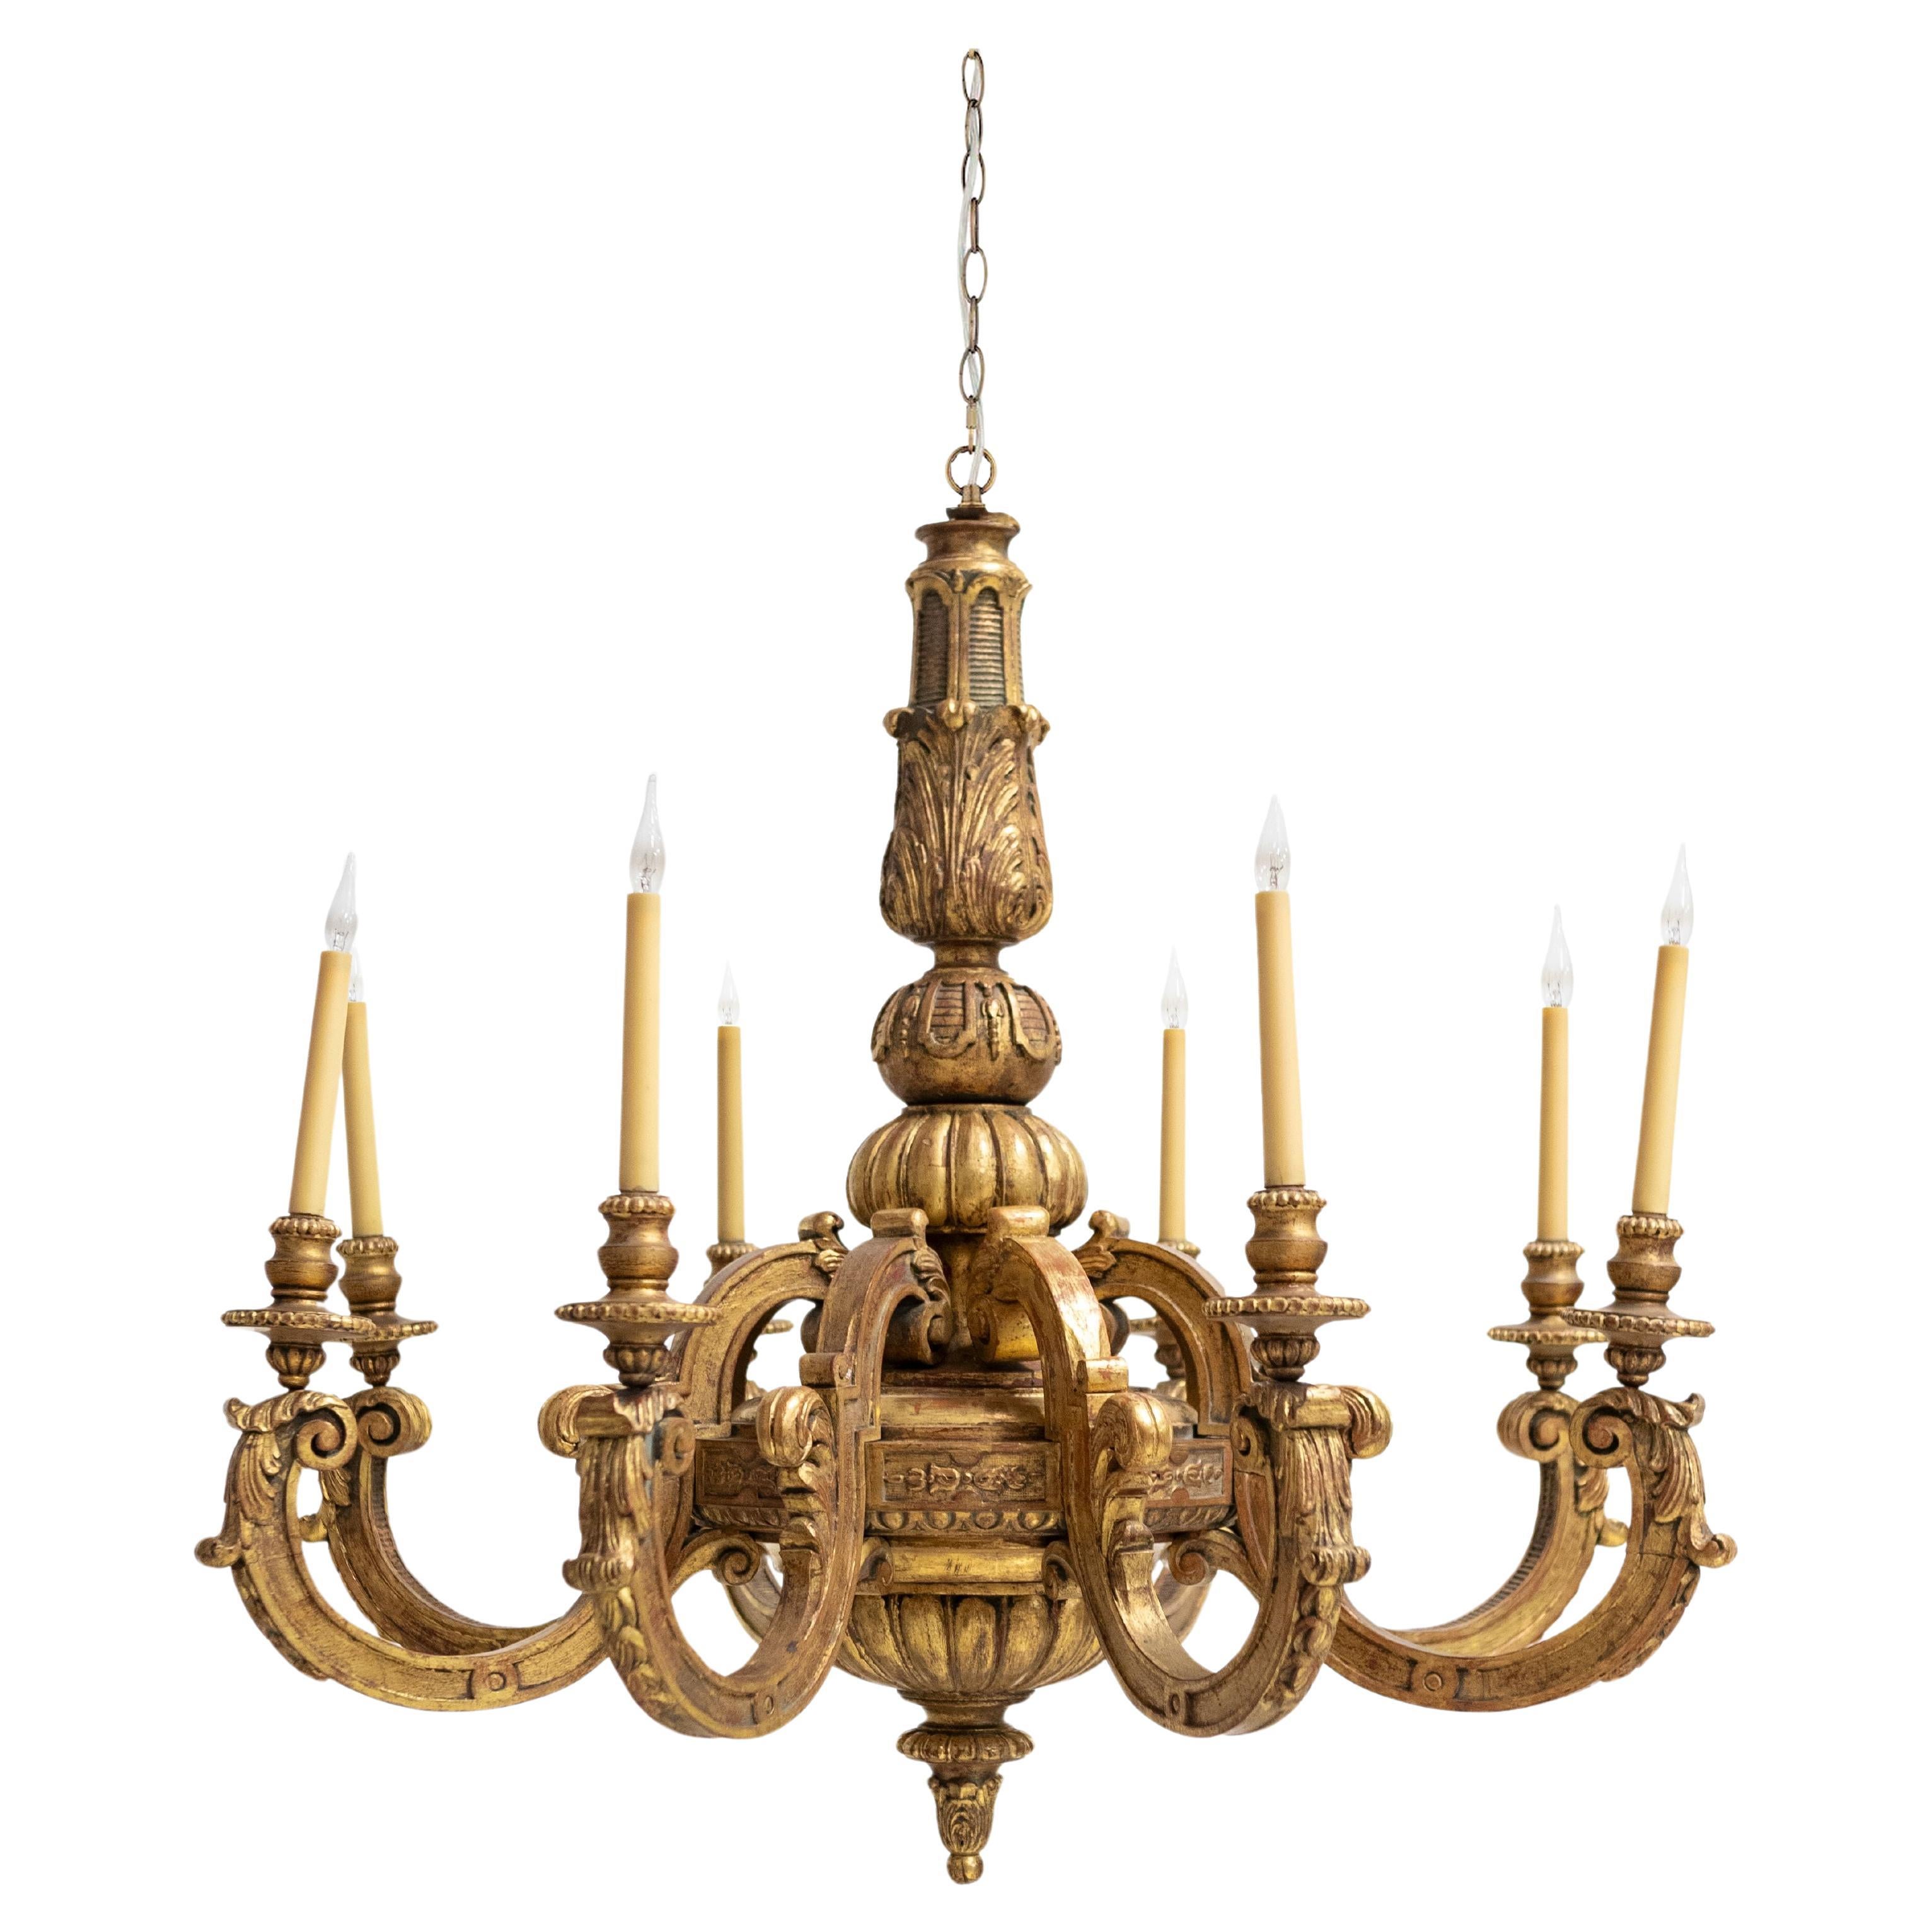 Large Antique Italian Giltwood 19th Century 8 Arm Chandelier For Sale